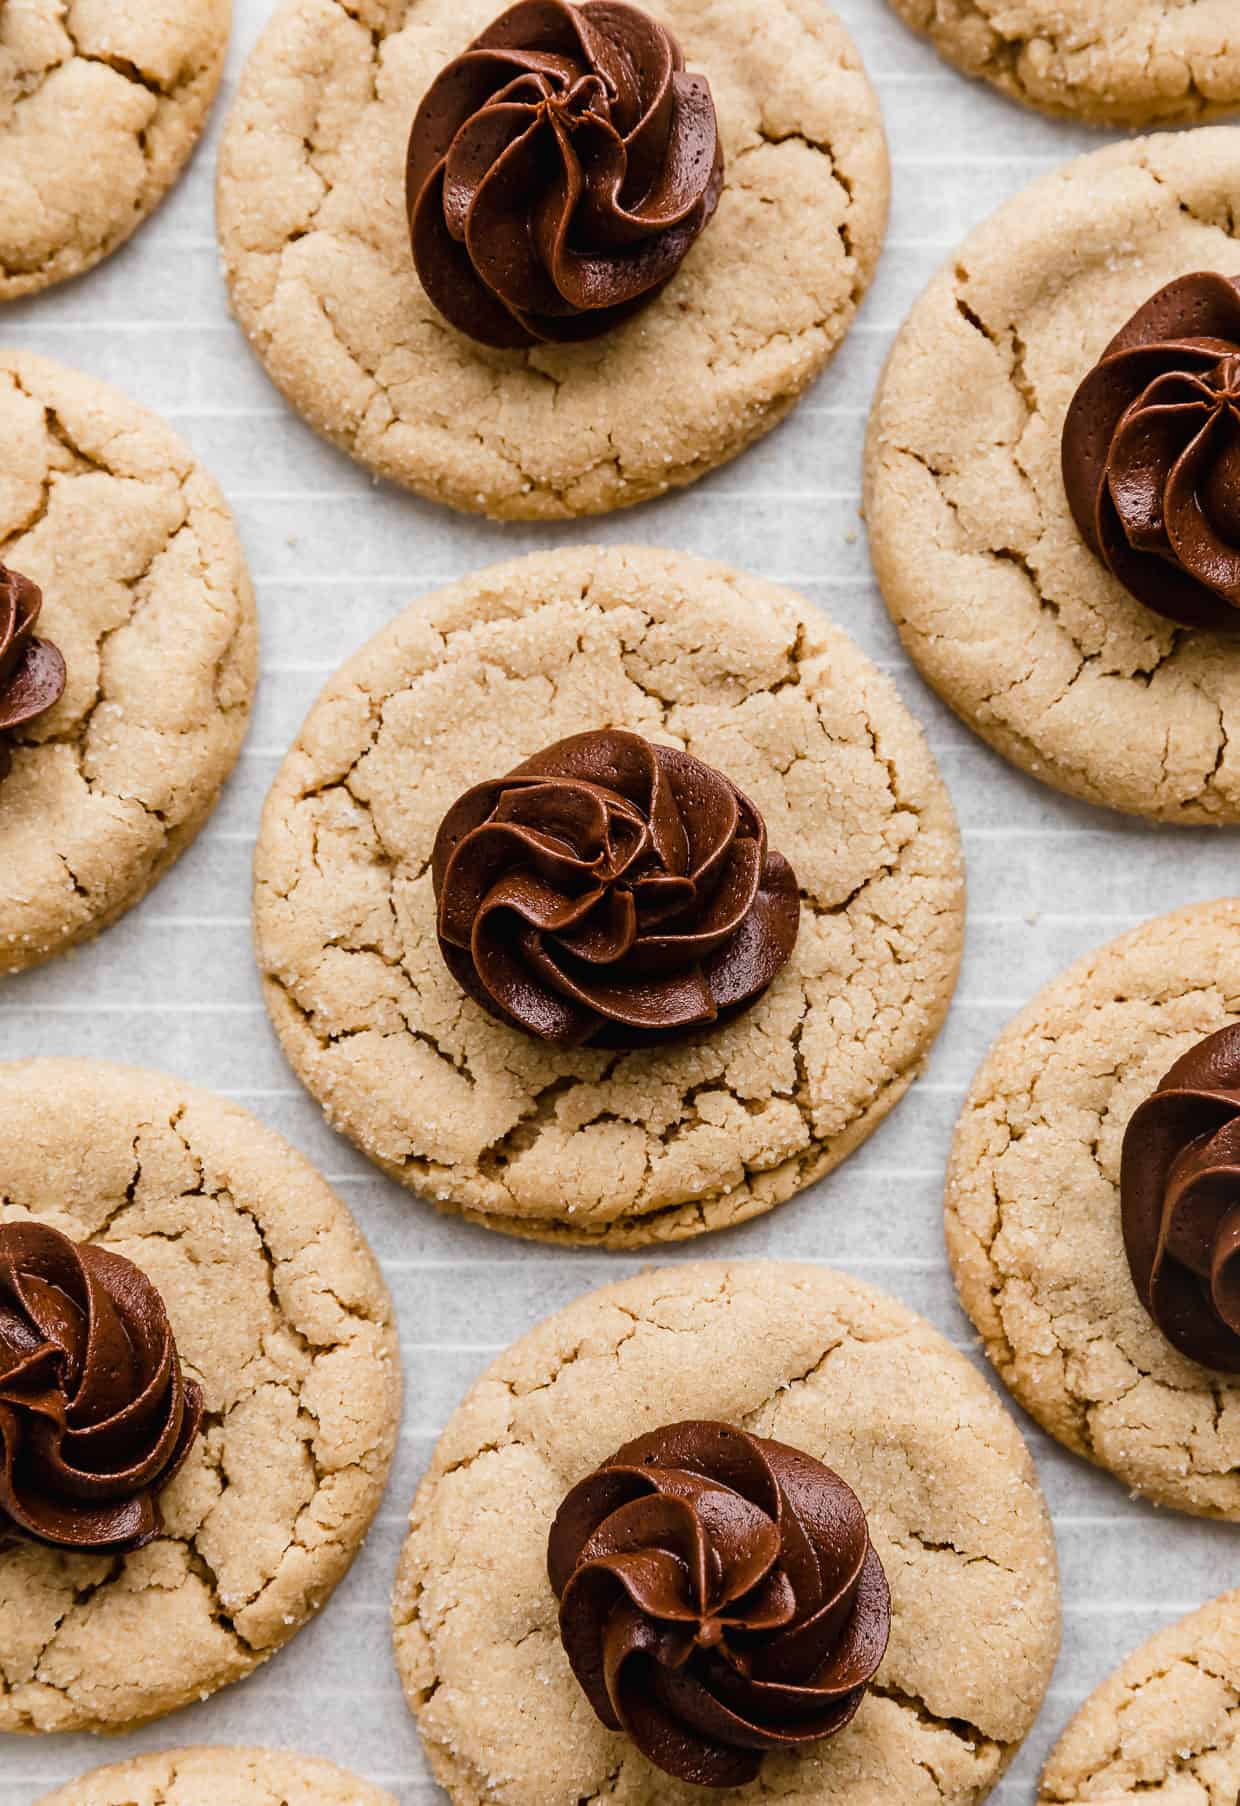 Crumbl Peanut Butter Blossom Cookies topped with a swirl of chocolate fudge frosting in the center of each cookie.